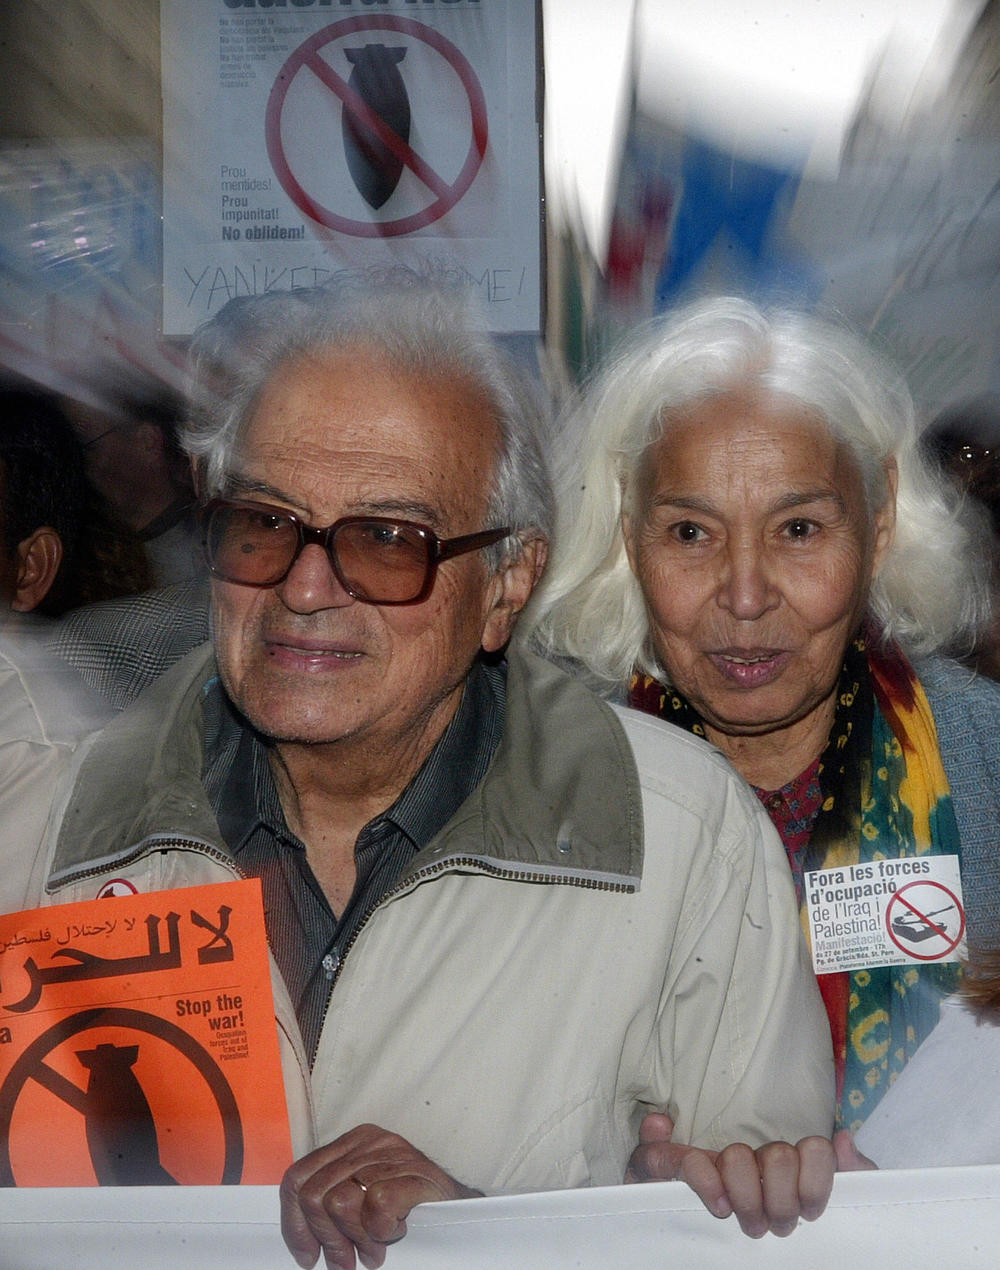 Nawal El Saadawi protested in Barcelona in March of 2004 with her then-husband, Sherif Hetata, against the war in Iraq. El Saadawi championed many causes over the full life, inspiring generations of activists, including Egyptian journalist Mona Eltahawy.